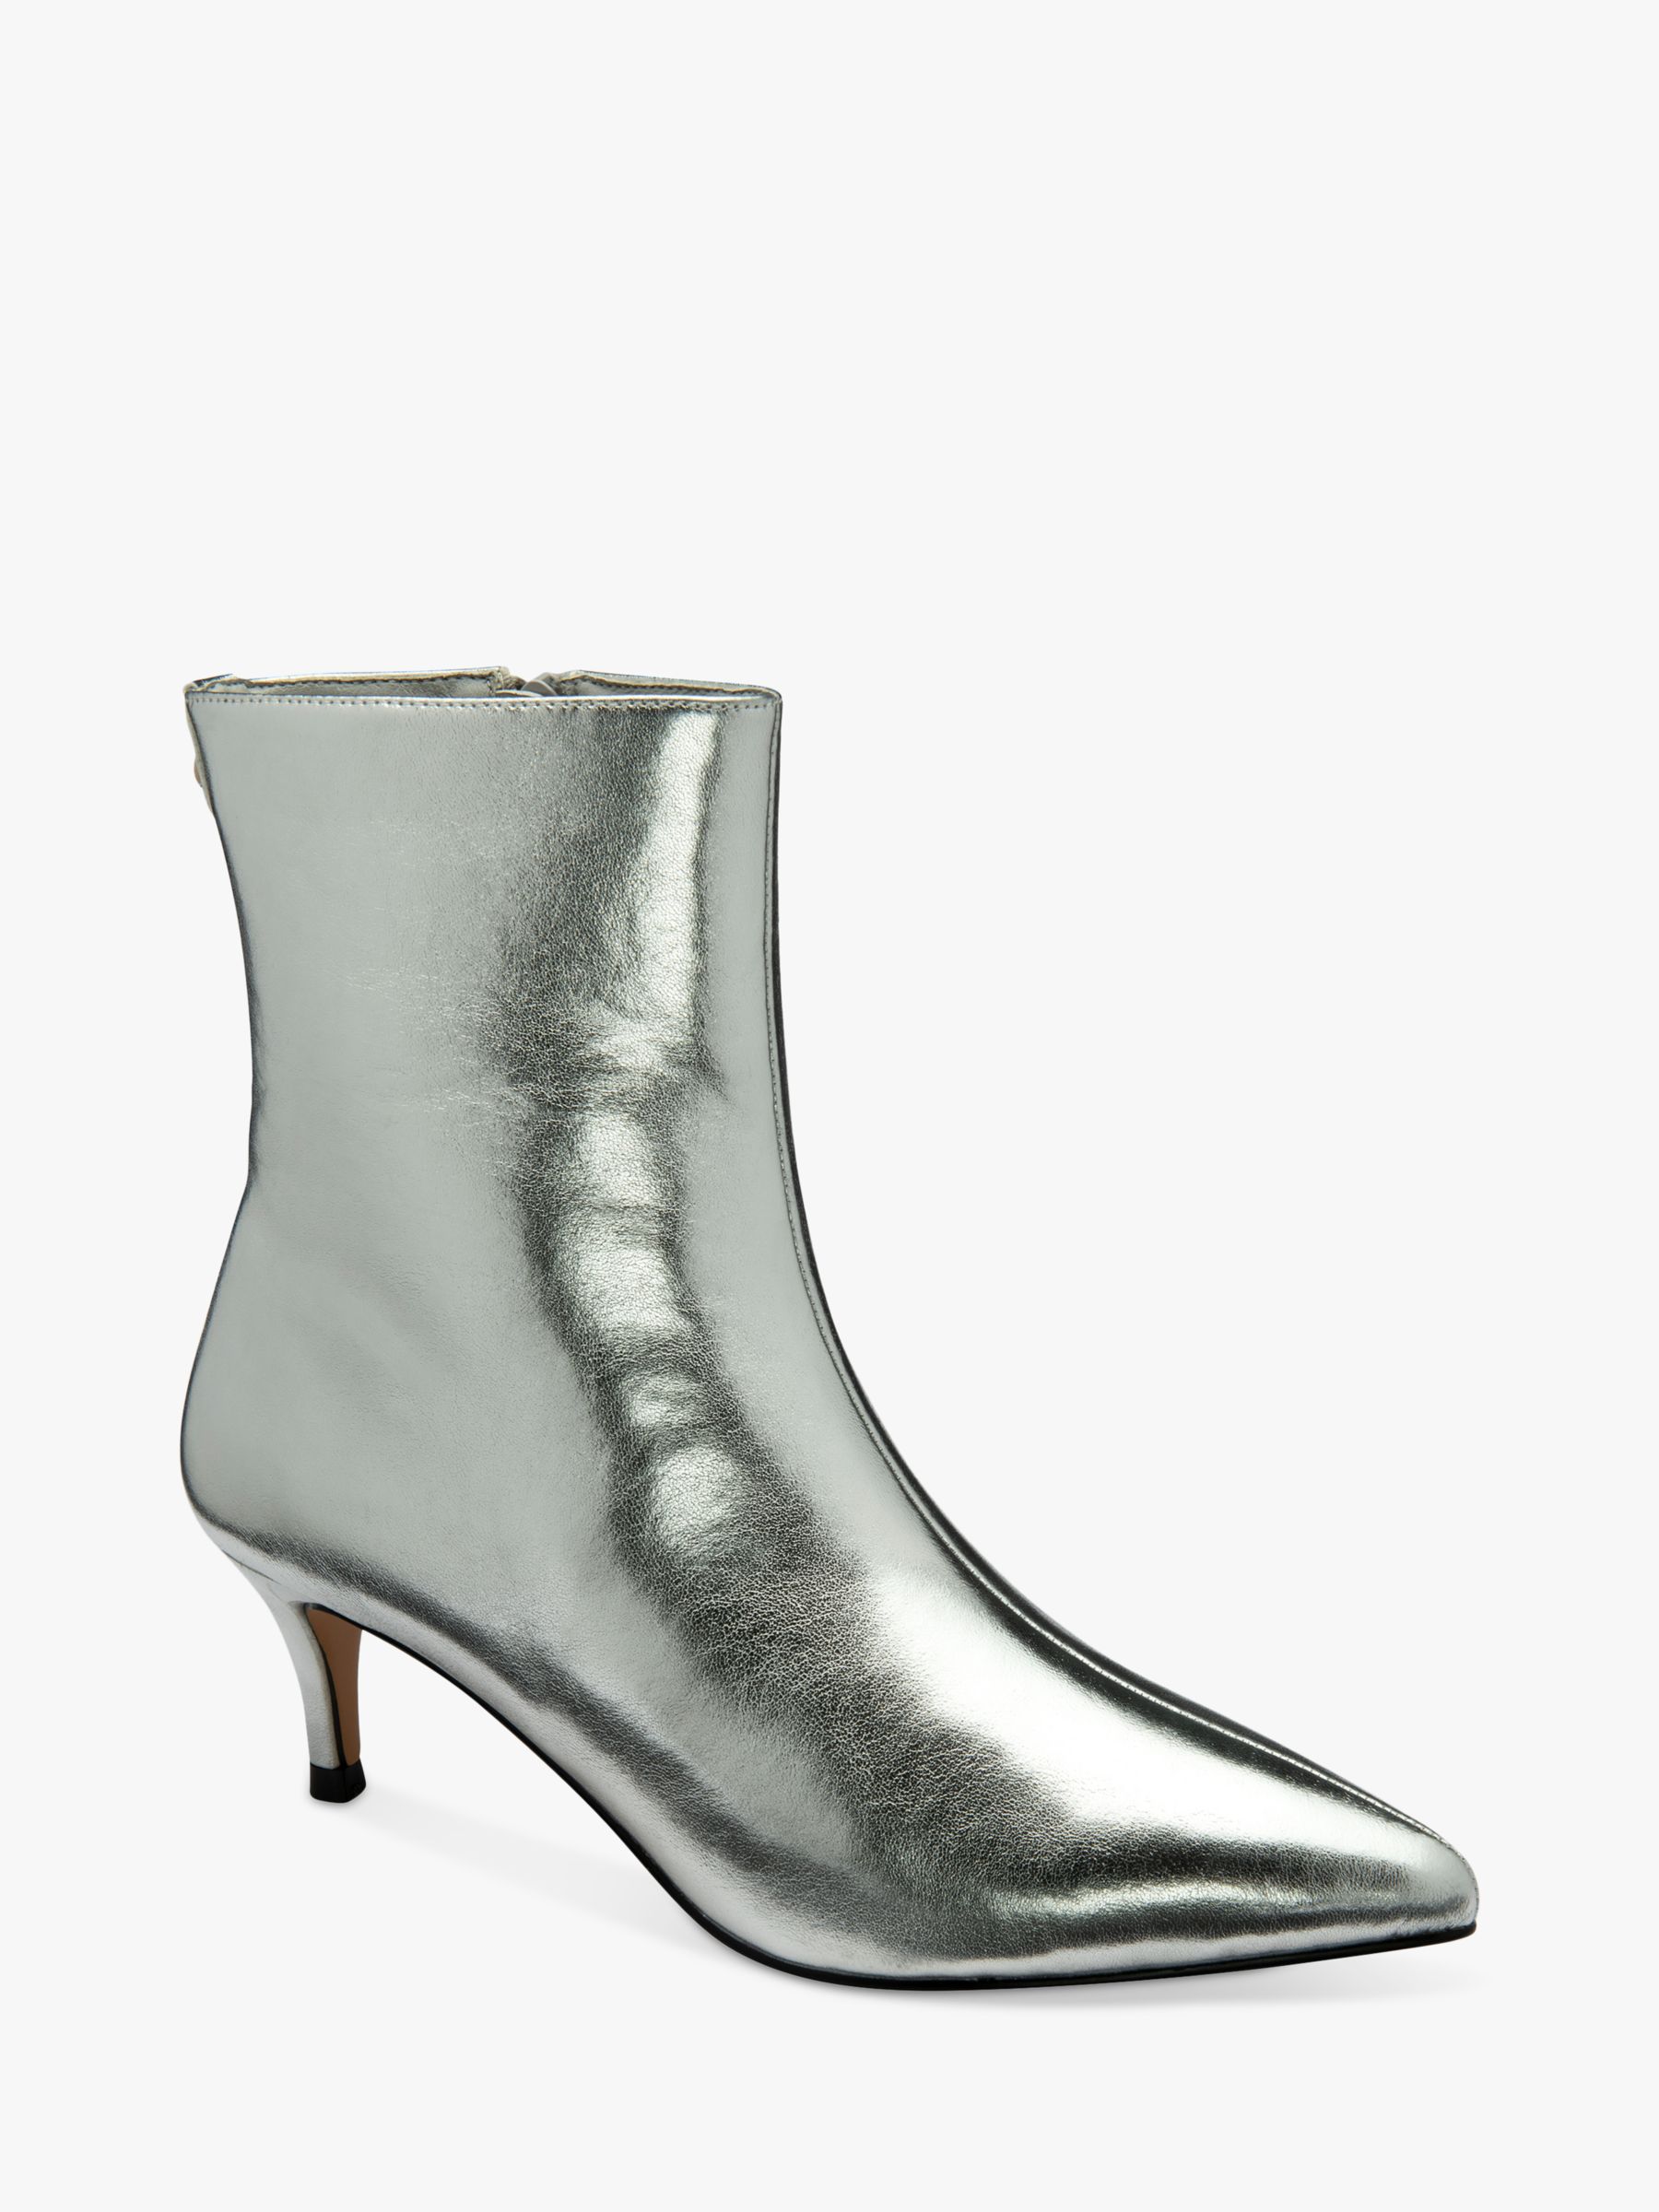 Ravel Currans Metallic Ankle Boots, Silver, 7